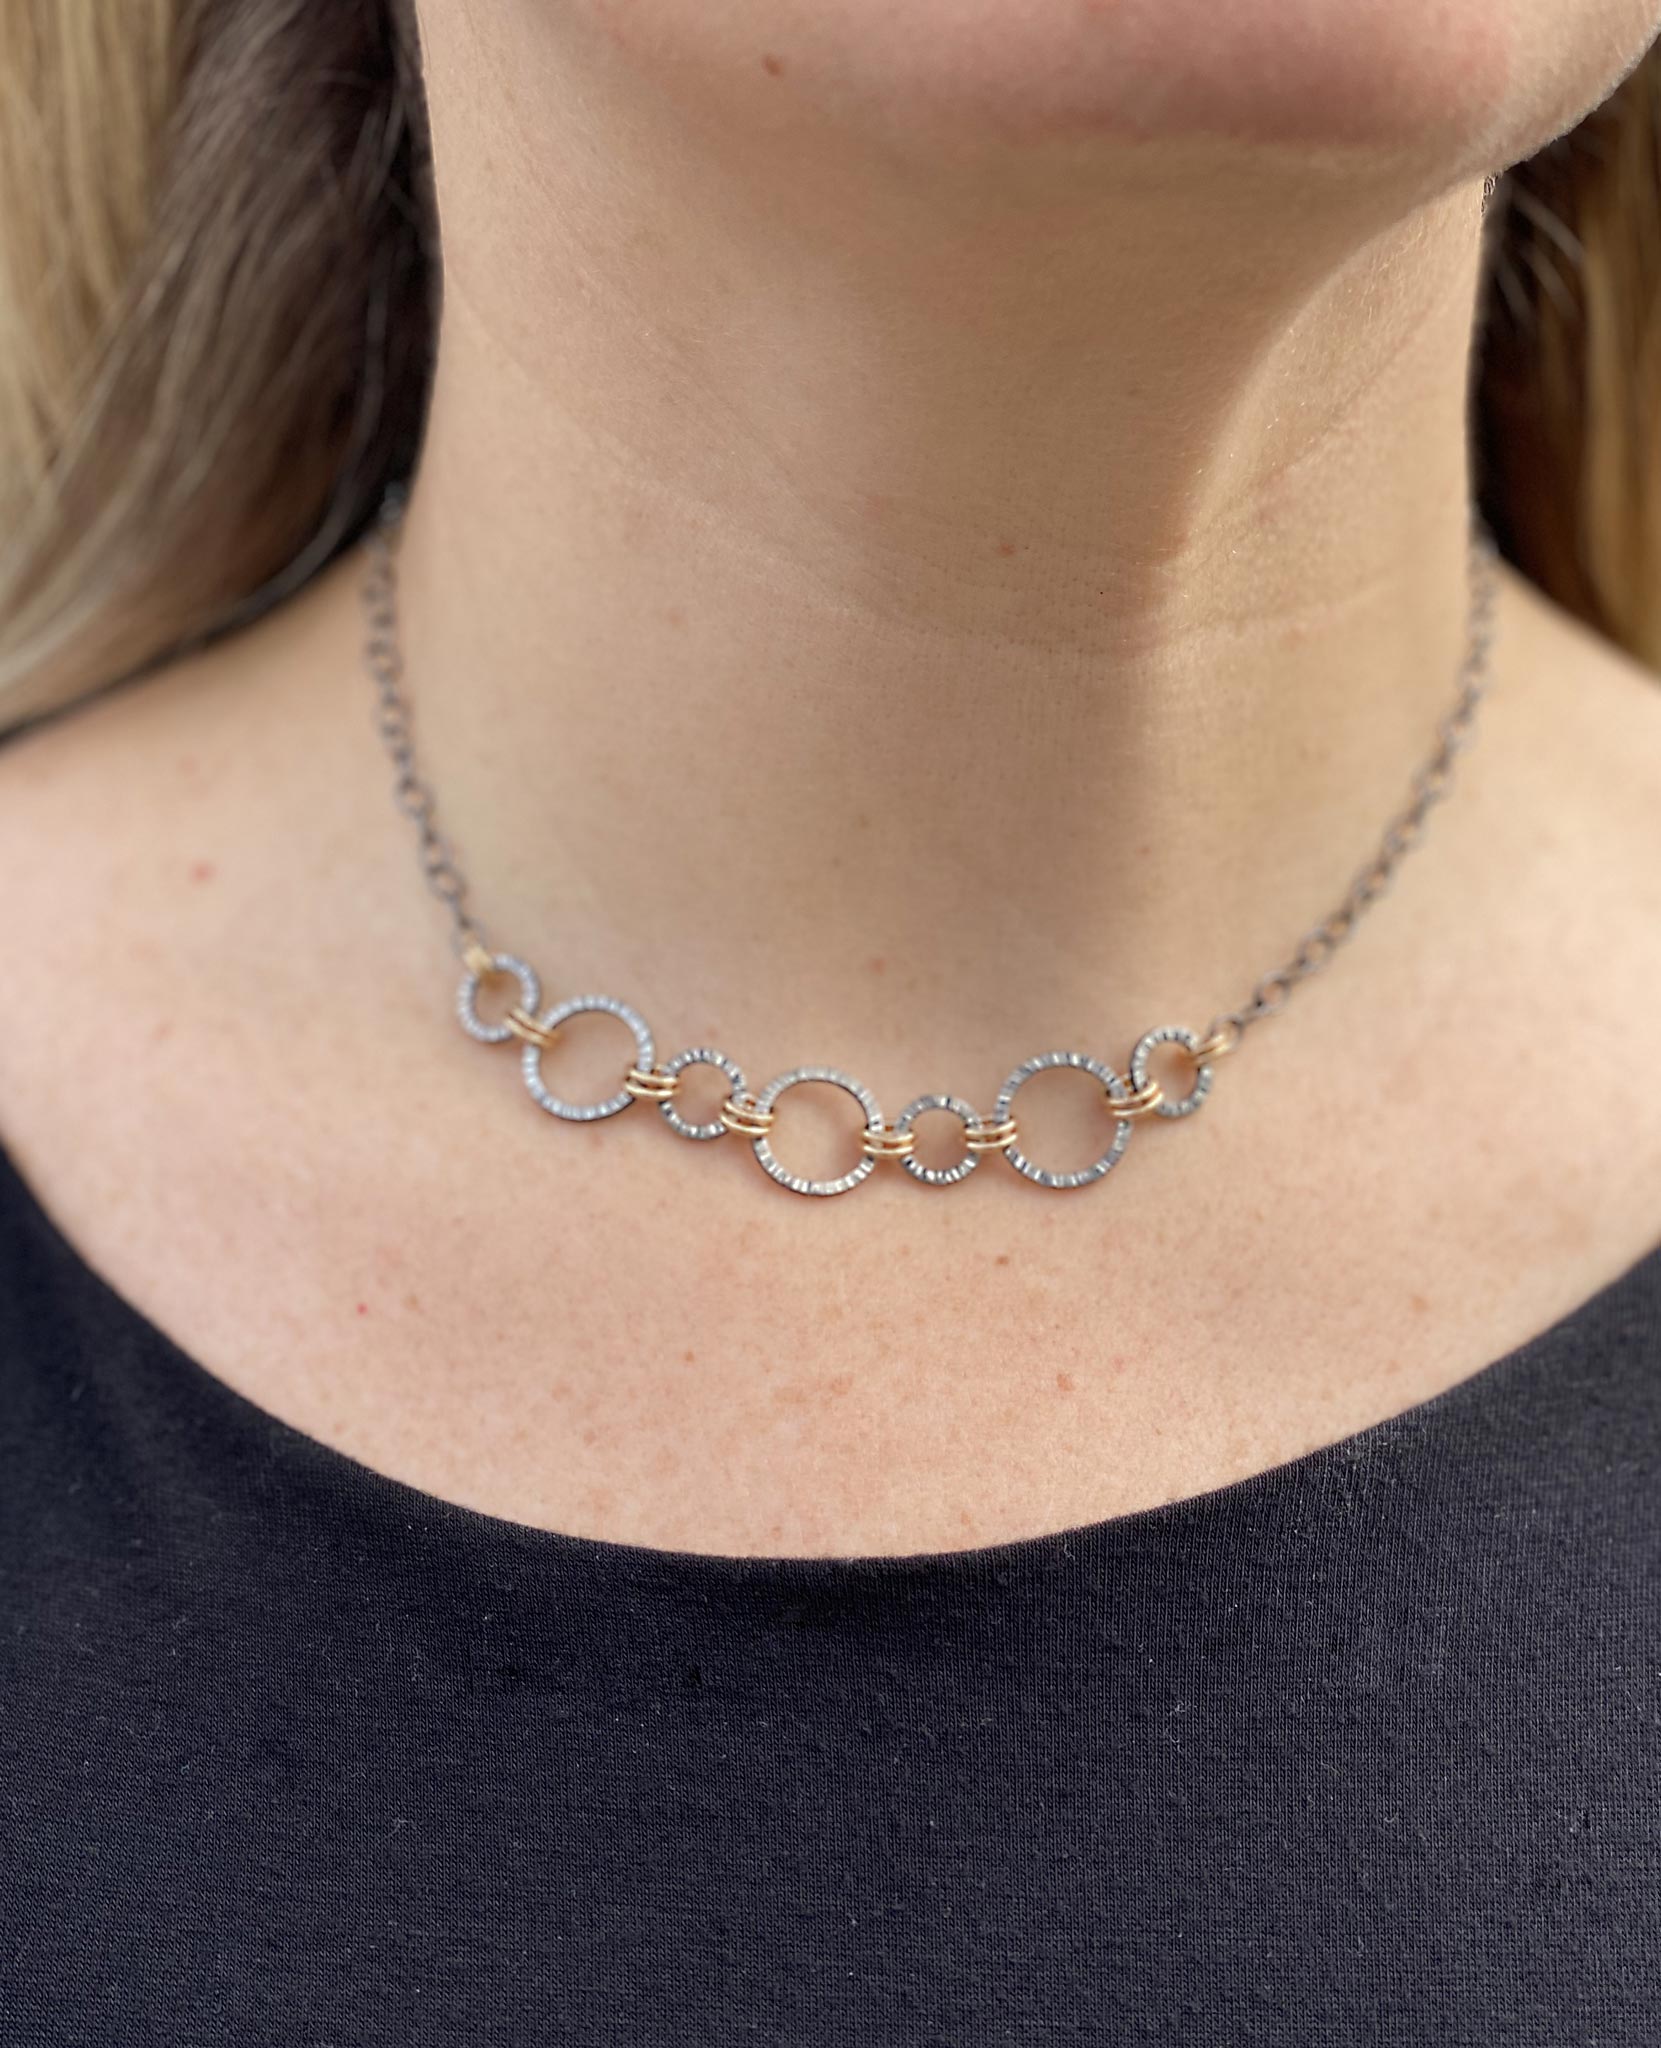 Lined Linked Connections Necklace (N1713) - DanaReedDesigns